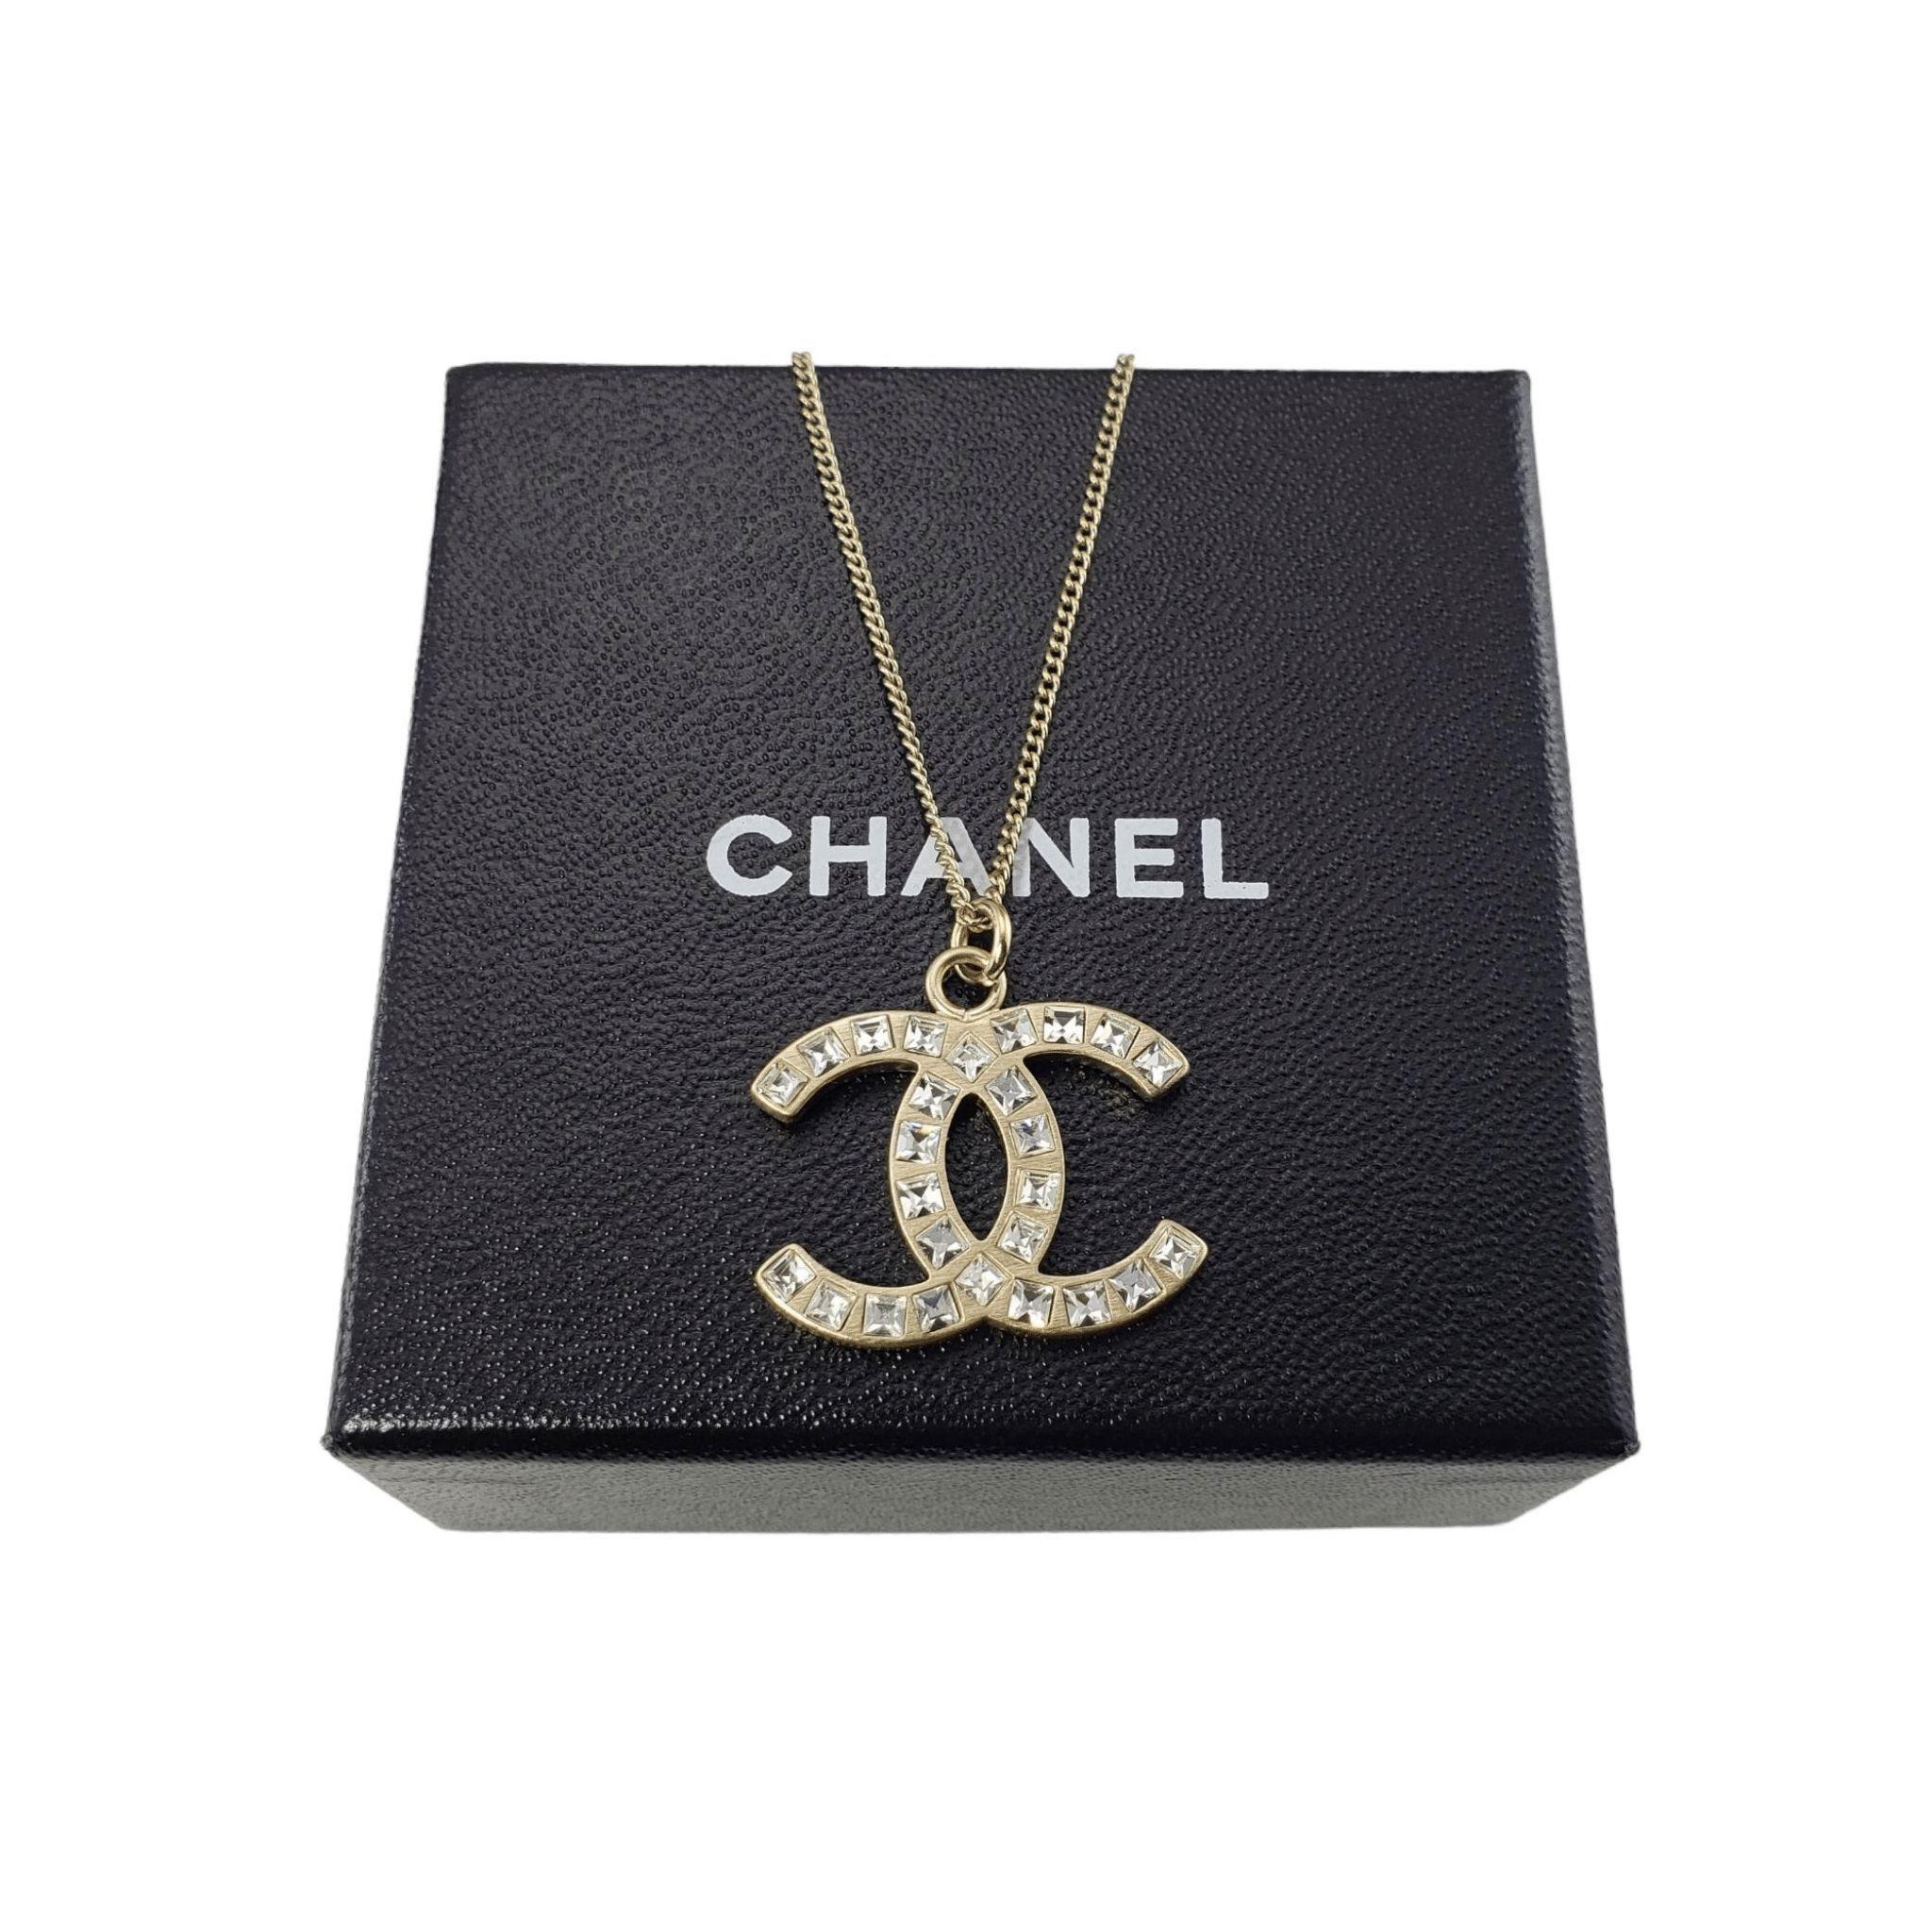 Chanel Baguette Crystal CC Pendant Necklace-

This stunning pendant necklace features the Chanel CC logo encrusted with sparkling baguette crystals.

Size: 21 mm x 25 mm (pendant)
     16.5 inches (necklace)

Weight: 3.4 dwt. / 5.4